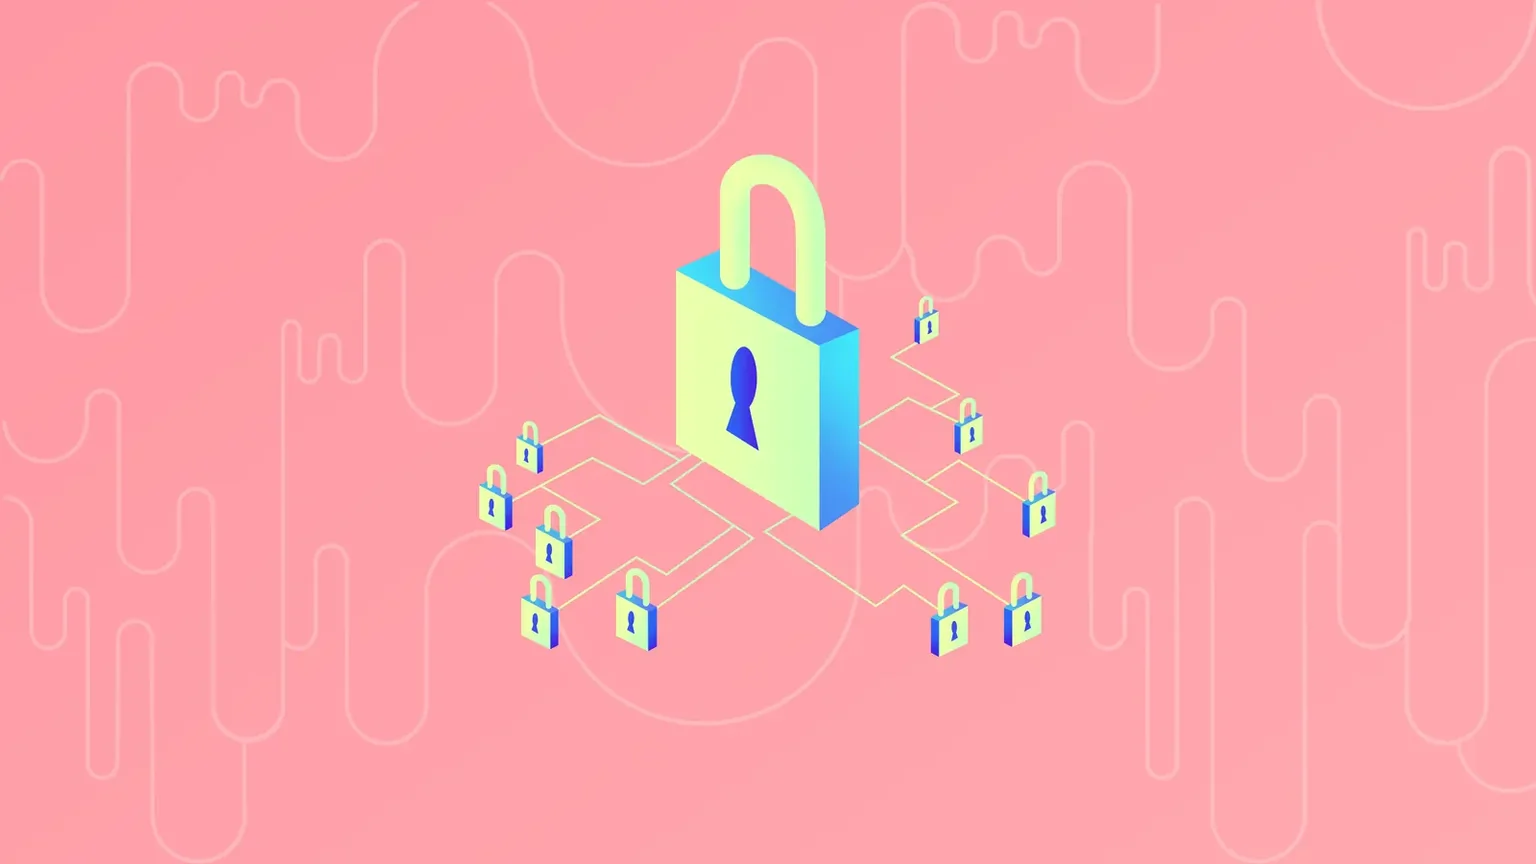 Privacy coins. Image: Grant Kempster/Decrypt